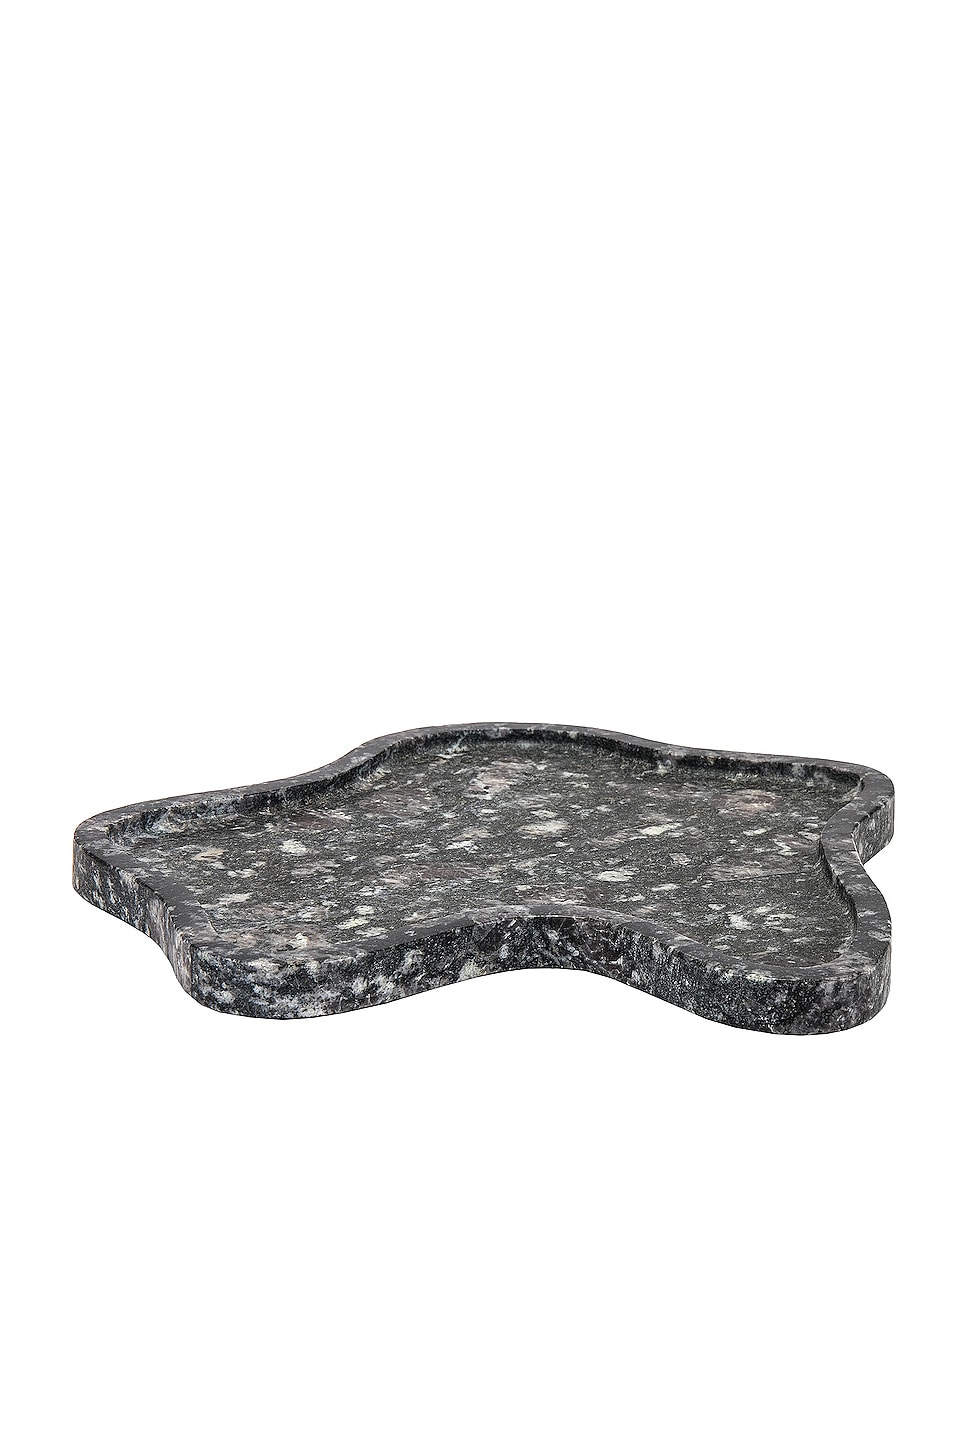 Image 1 of Anastasio Home The Flo Tray in Moon Rock